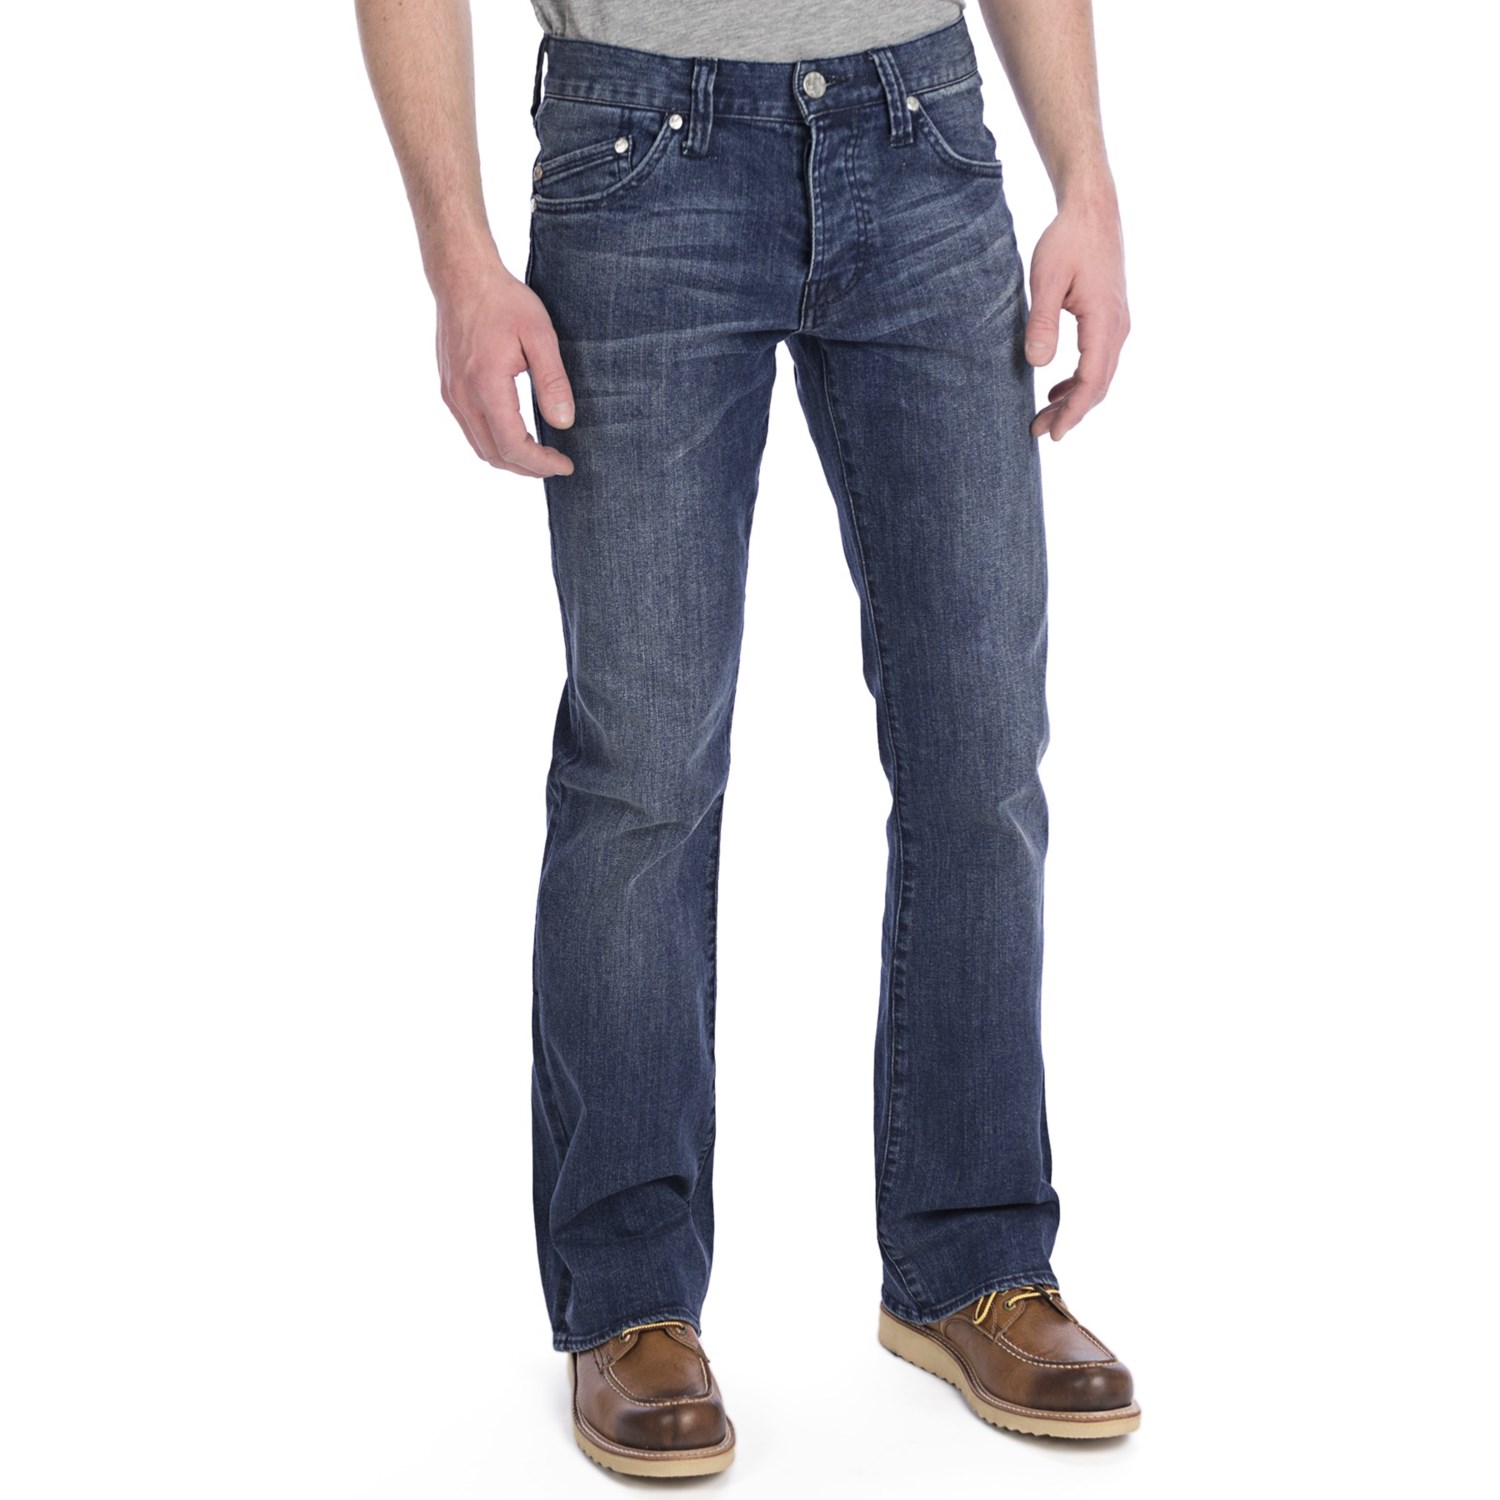 William Rast Ethan Bootcut Jeans (For Men) 5486T - Save 48%